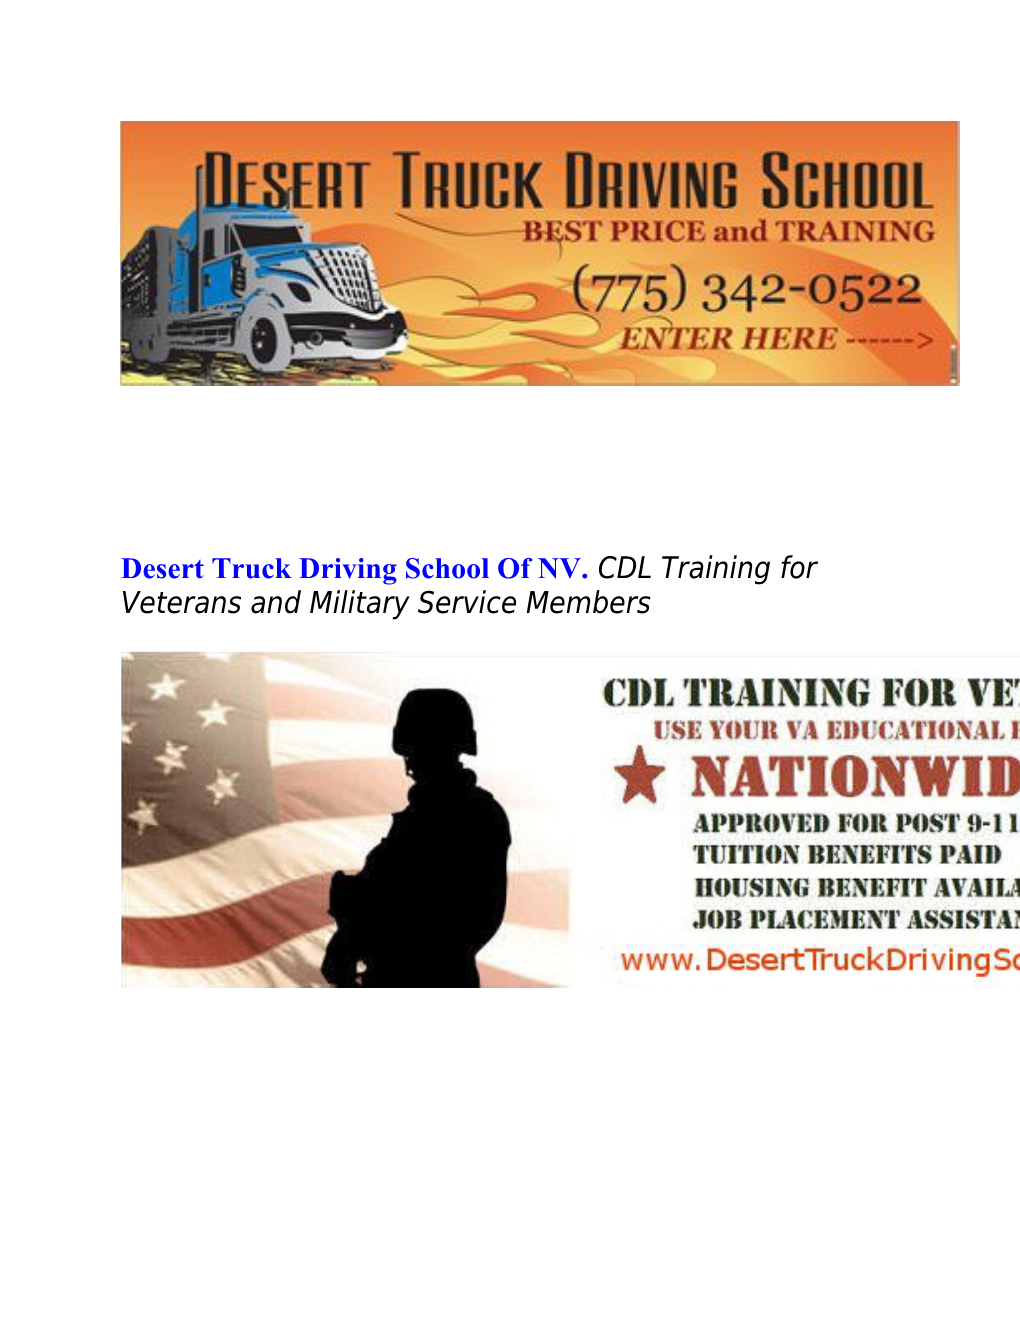 Desert Truck Driving School of NV. CDL Training for Veterans and Military Service Members